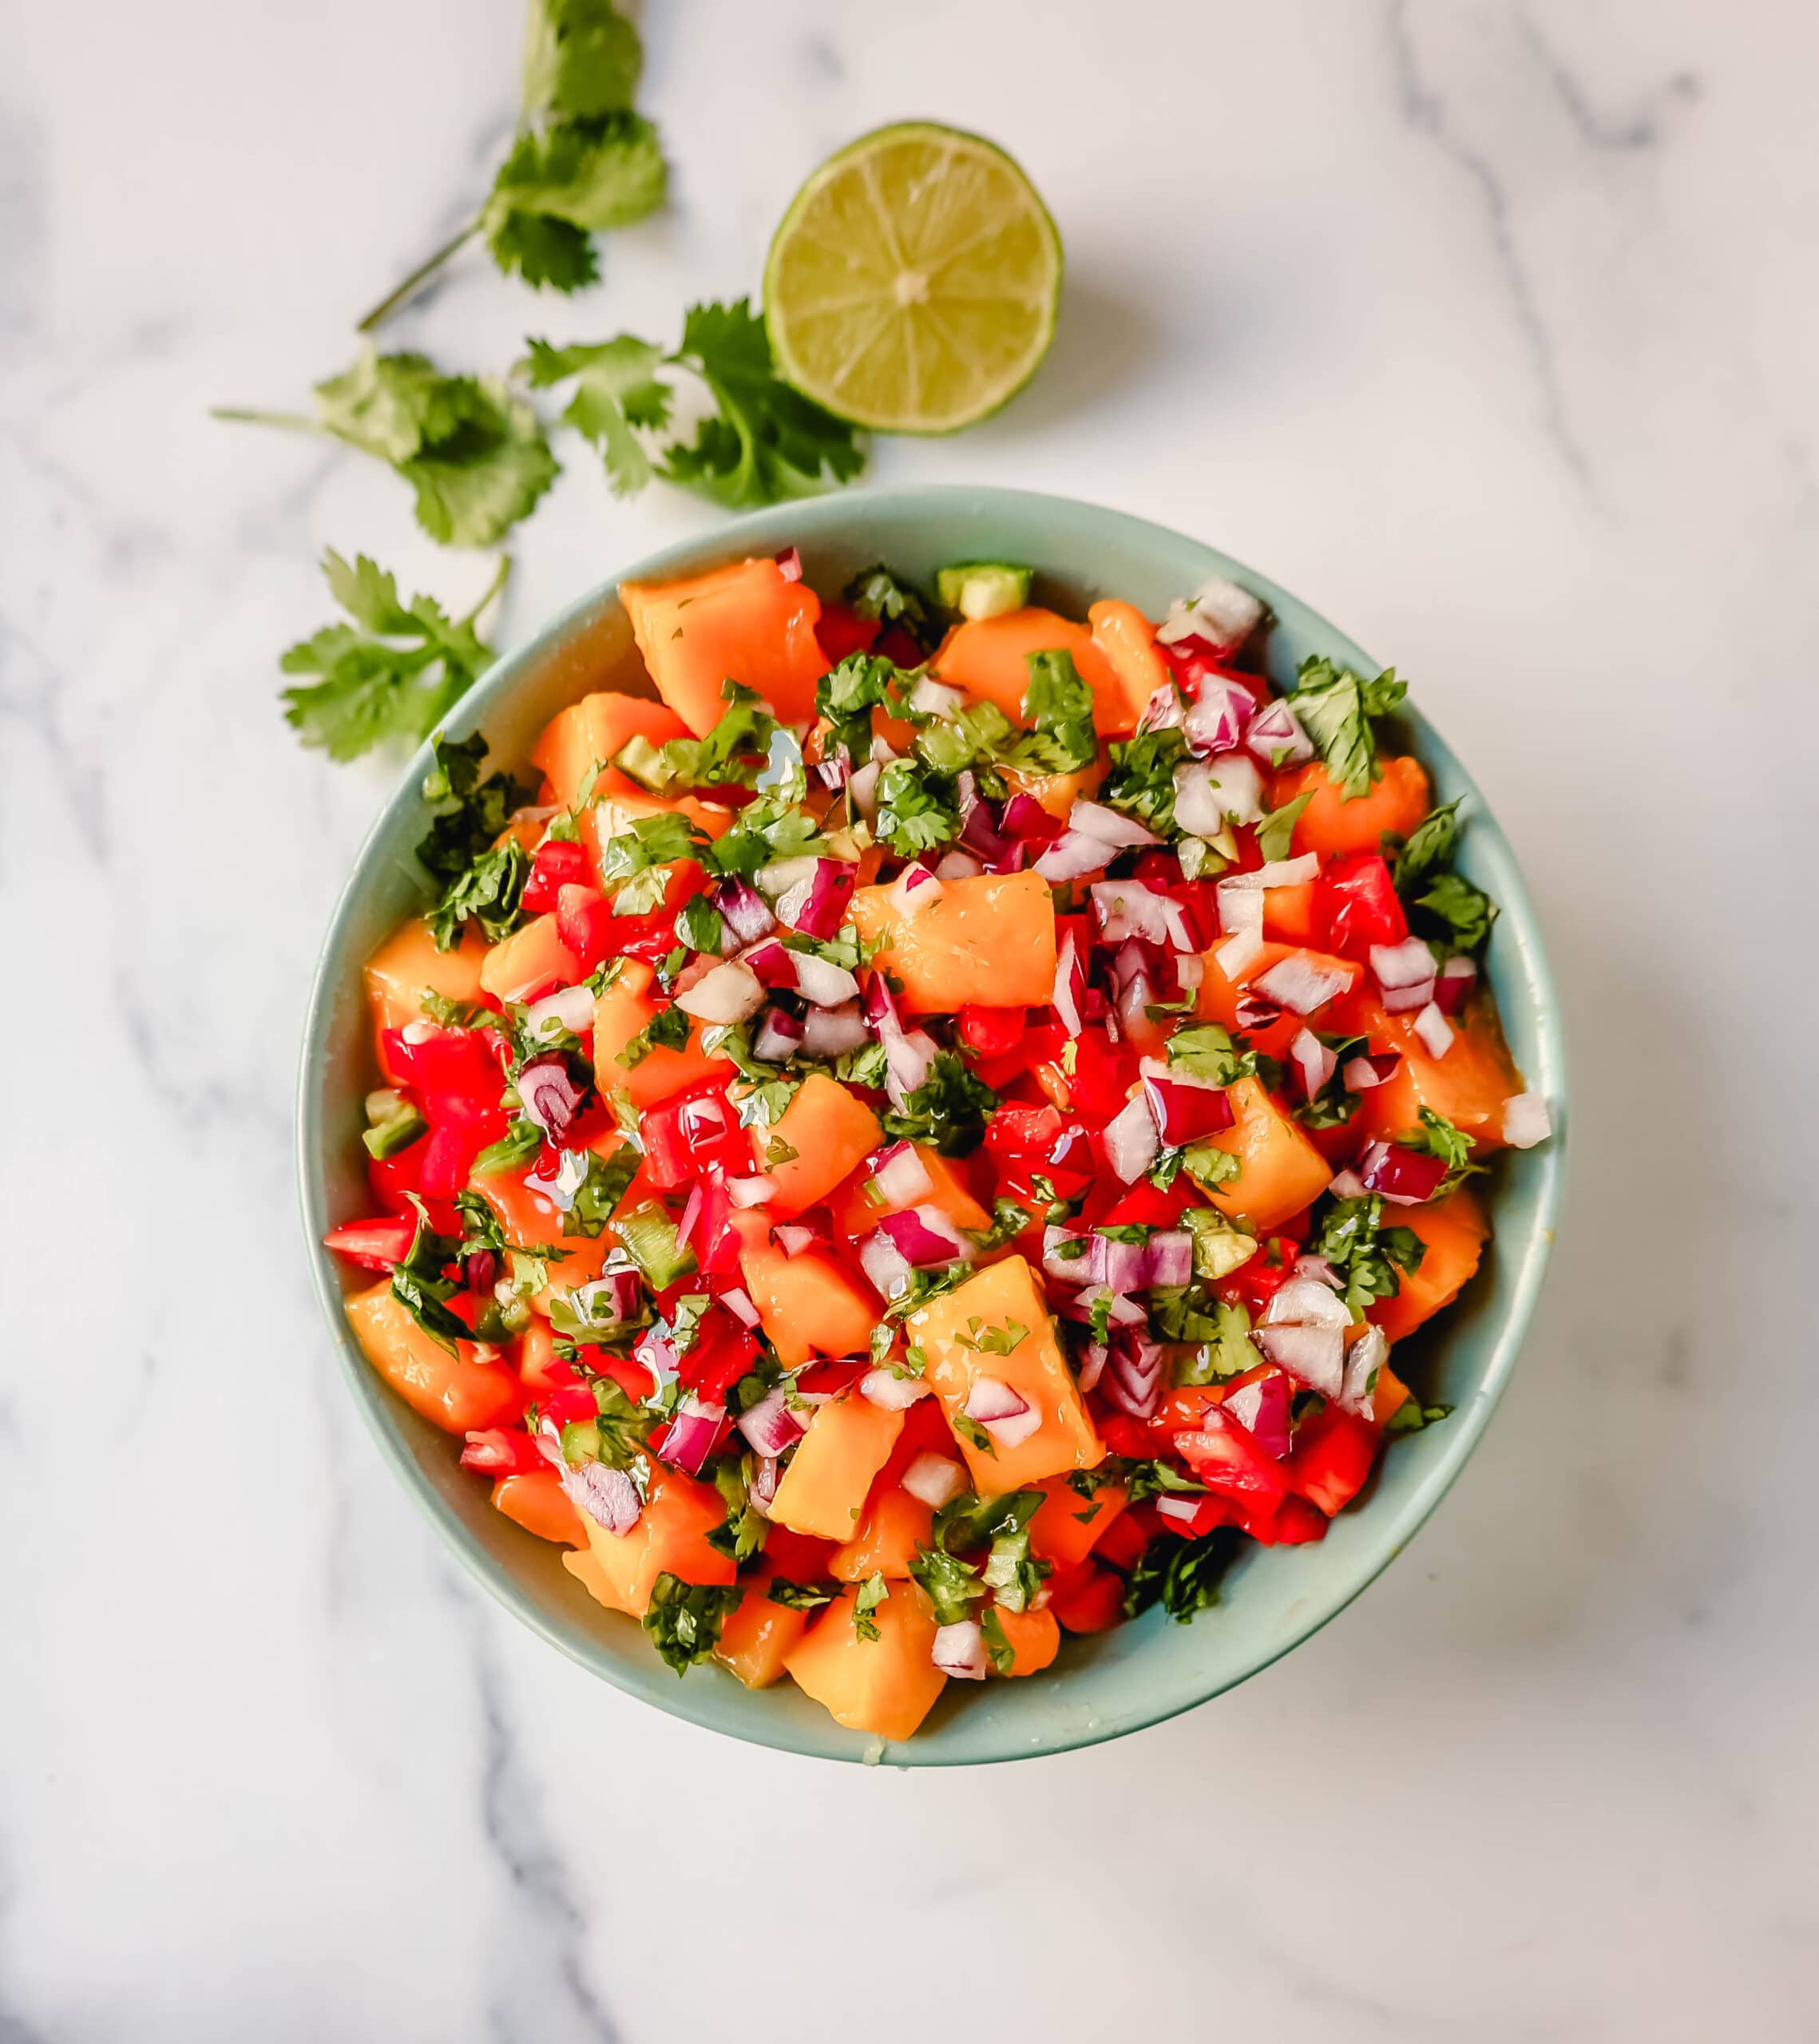 Homemade Fresh Mango Salsa with ripe mango, red peppers, cilantro, red onion, jalapeno, lime juice, salt, and a touch of honey. The freshest and best mango salsa recipe!